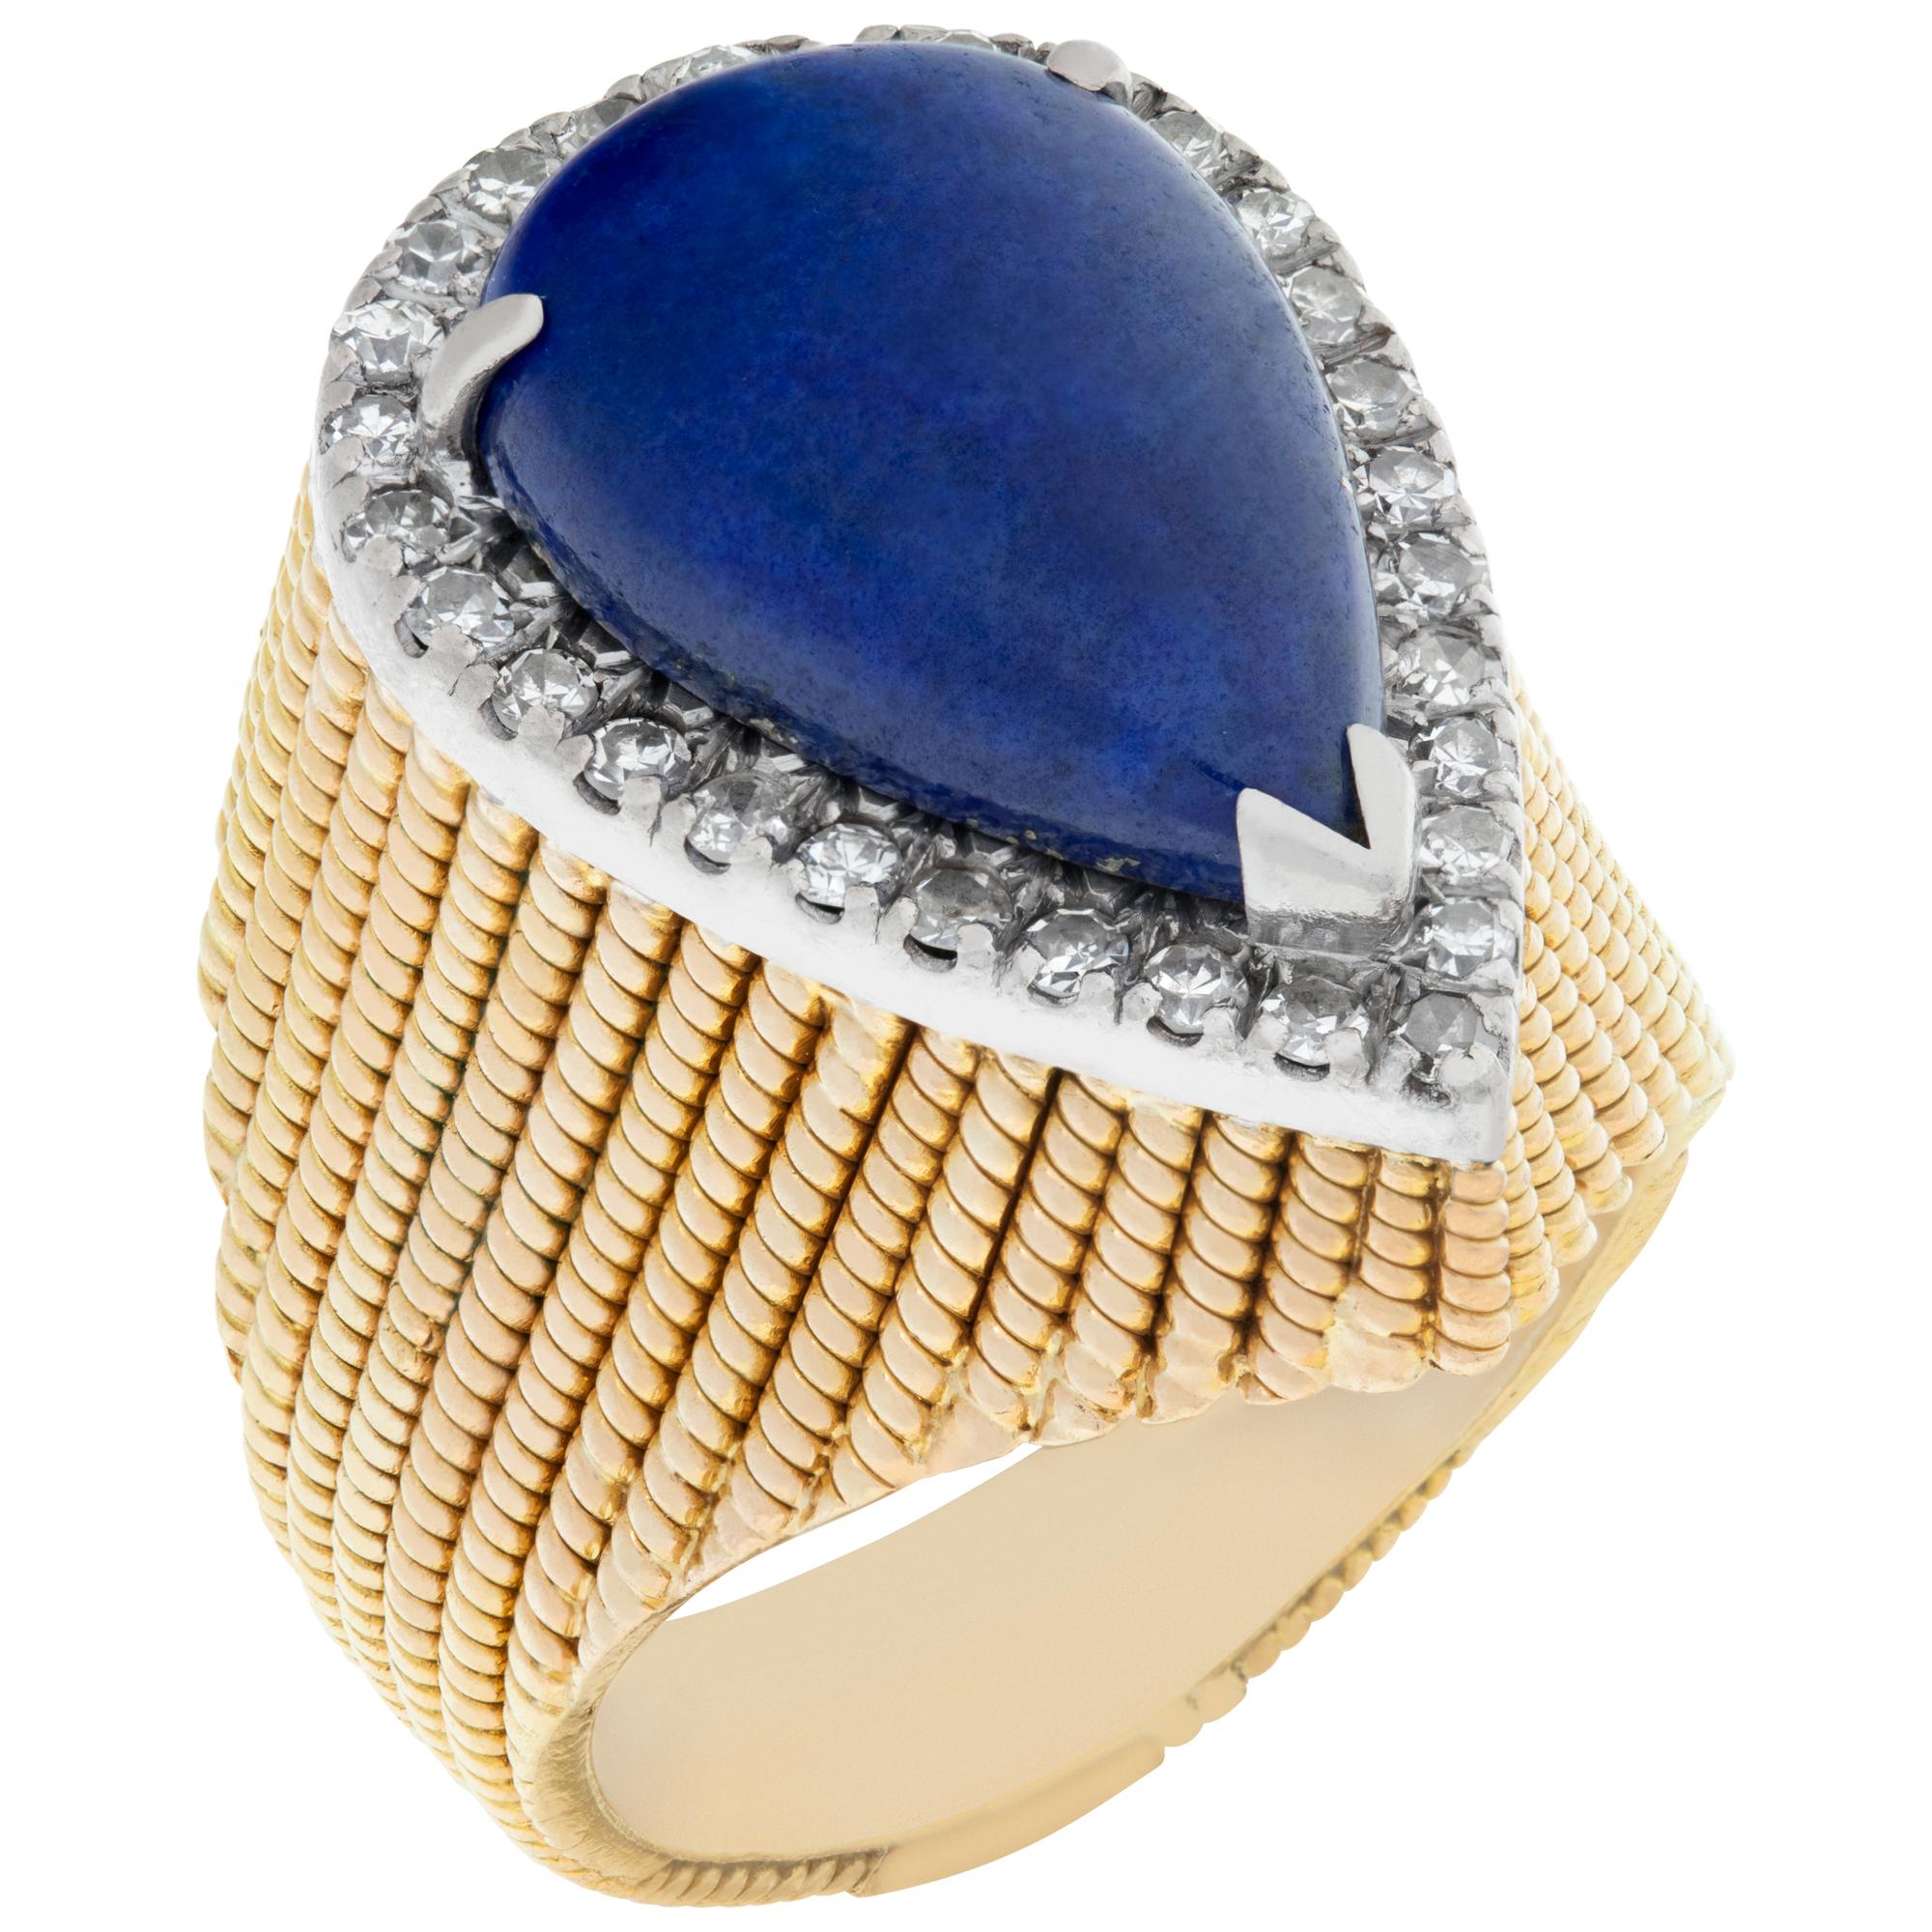 Cabochon Pear Shape Cut Lapis Lazuly Set in 14K Textured Yellow Gold Ring In Excellent Condition For Sale In Surfside, FL